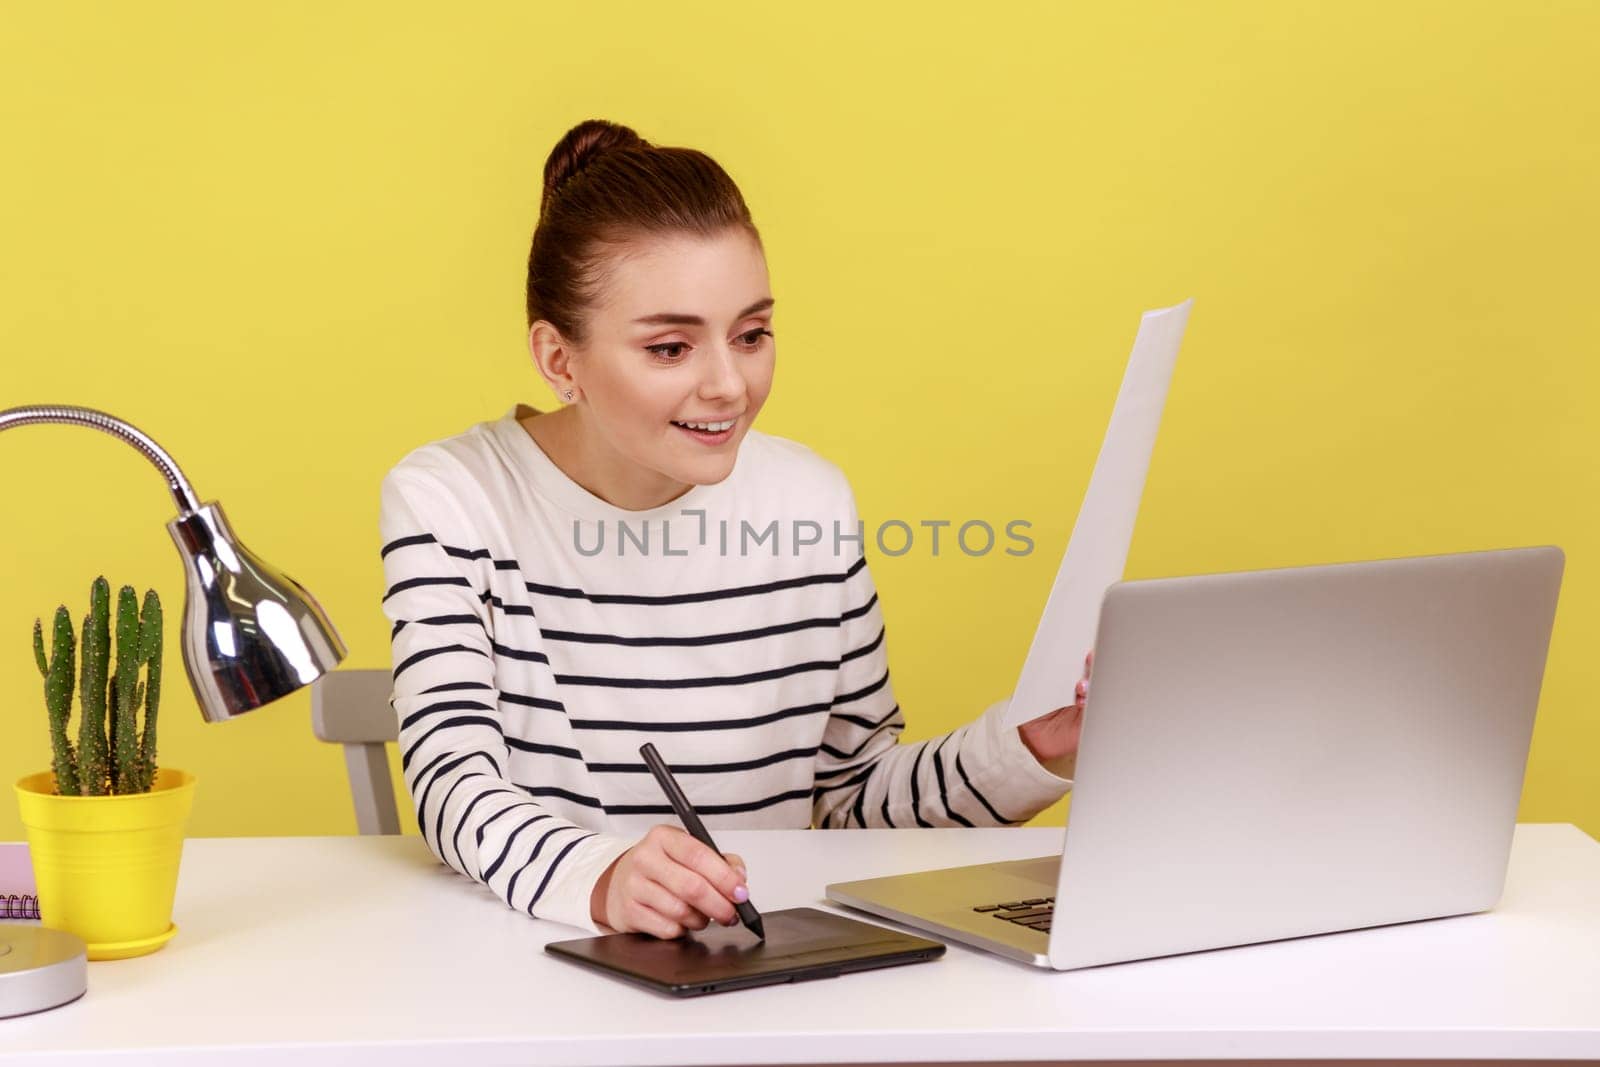 Portrait of smiling hard working woman designer drawing on professional tablet looking at laptop display, holding paper document. Indoor studio studio shot isolated on yellow background.